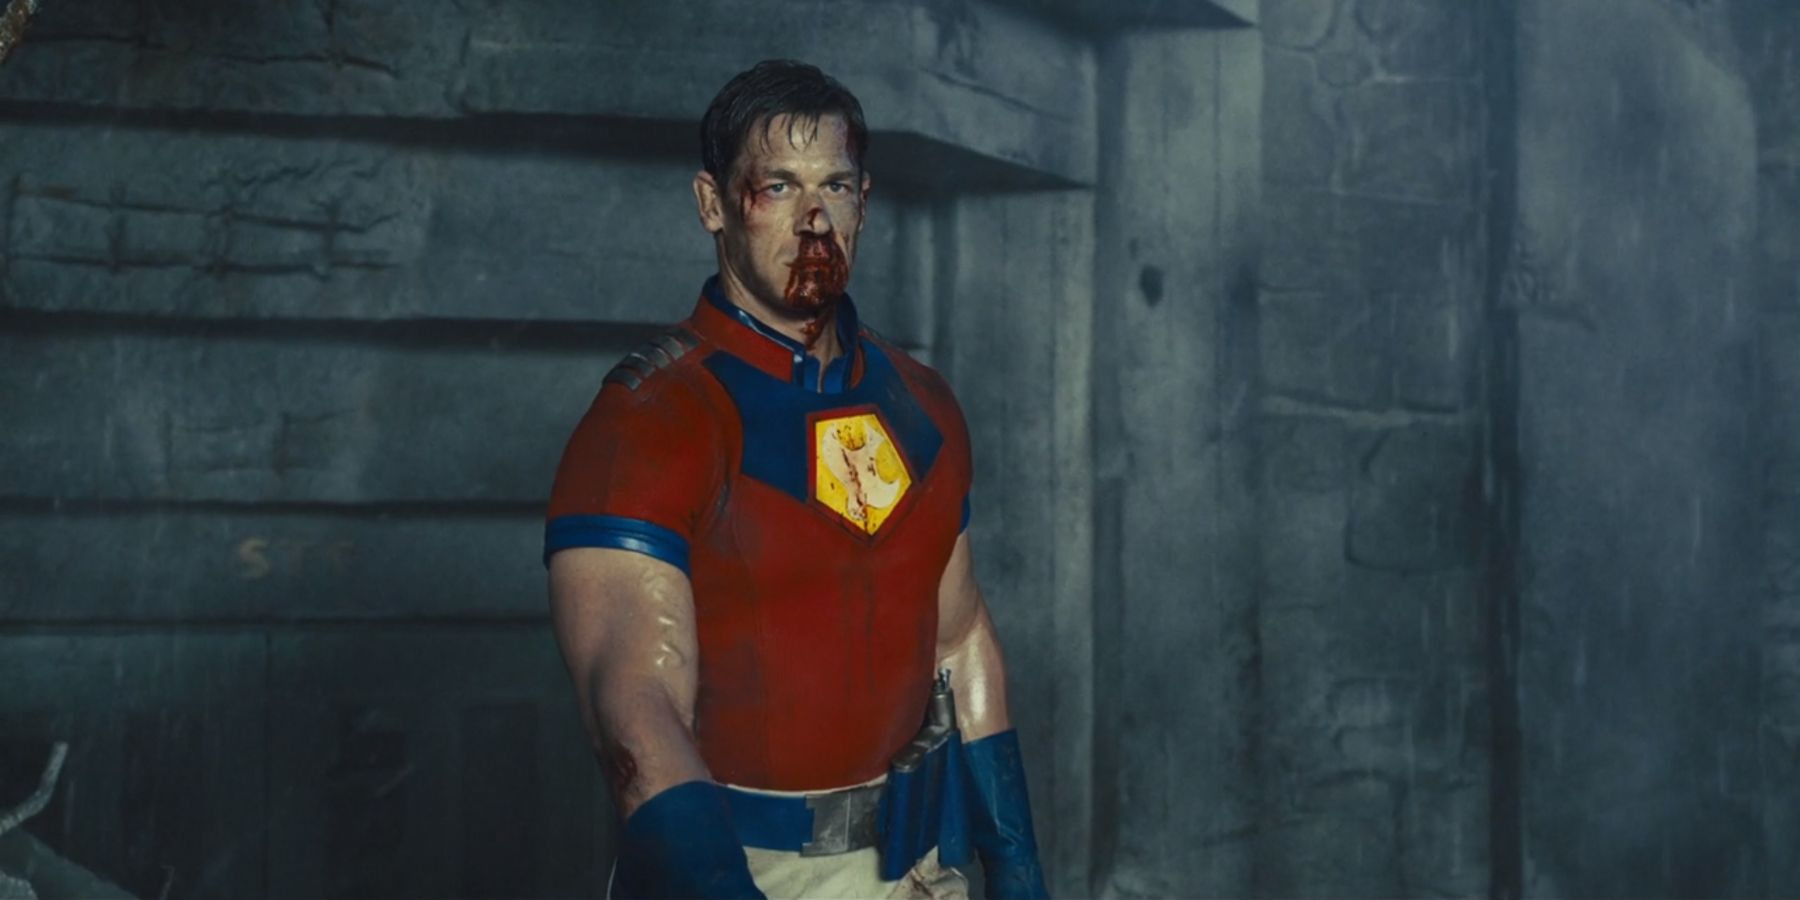 Peacemaker bloodied and beaten without his helmet in Jotunheim in James Gunn's The Suicide Squad